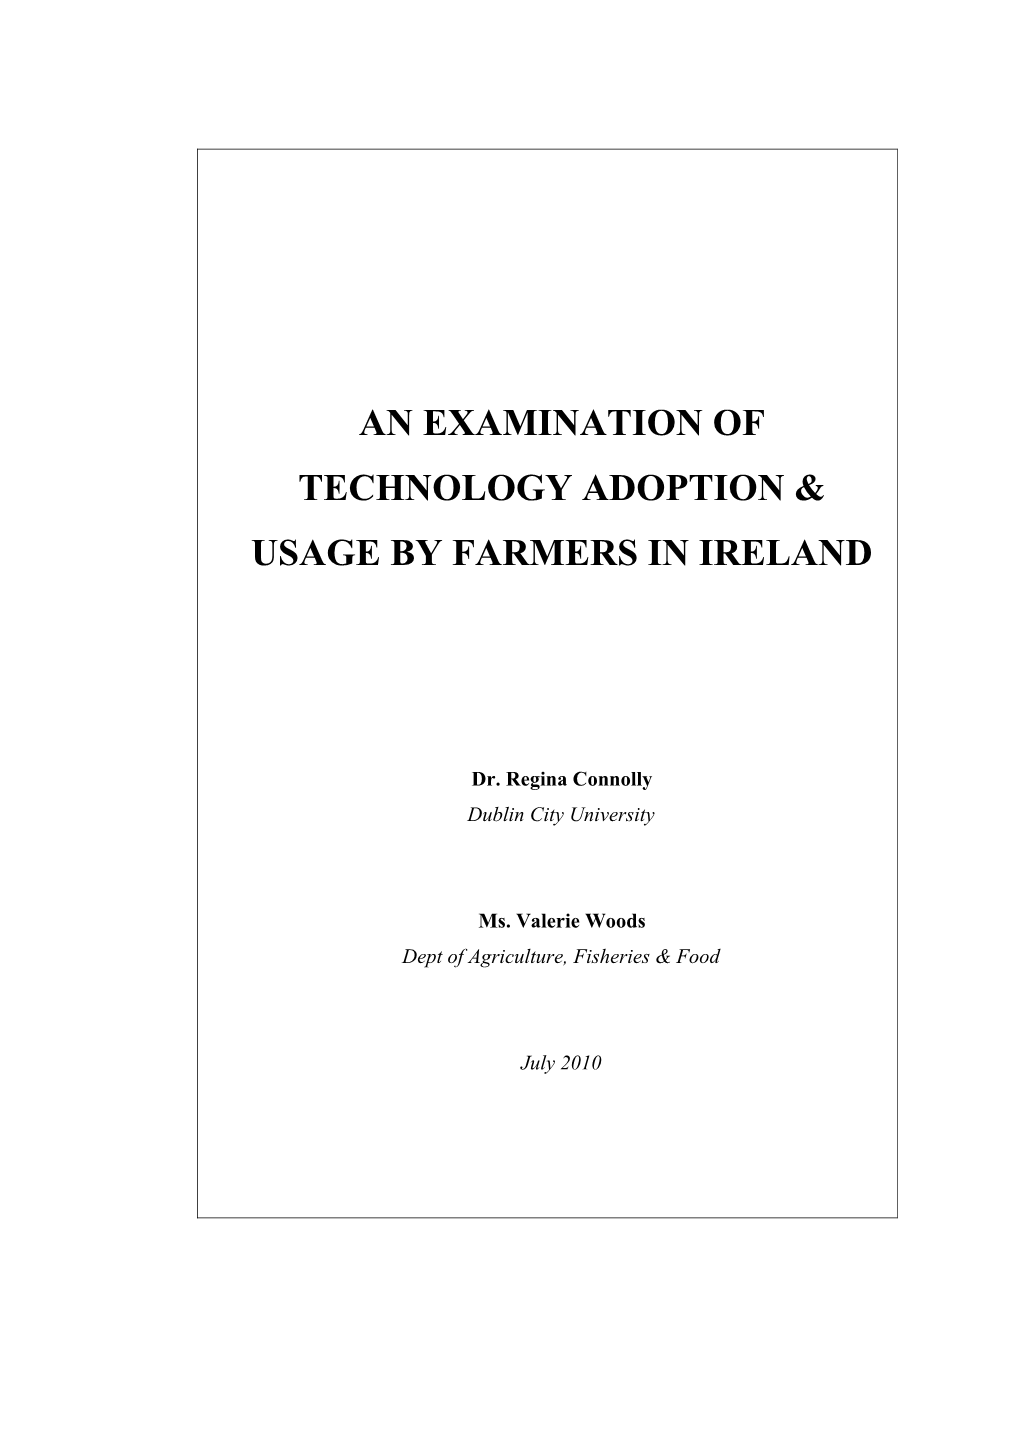 An Examination of Technology Adoption & Usage by Farmers in Ireland